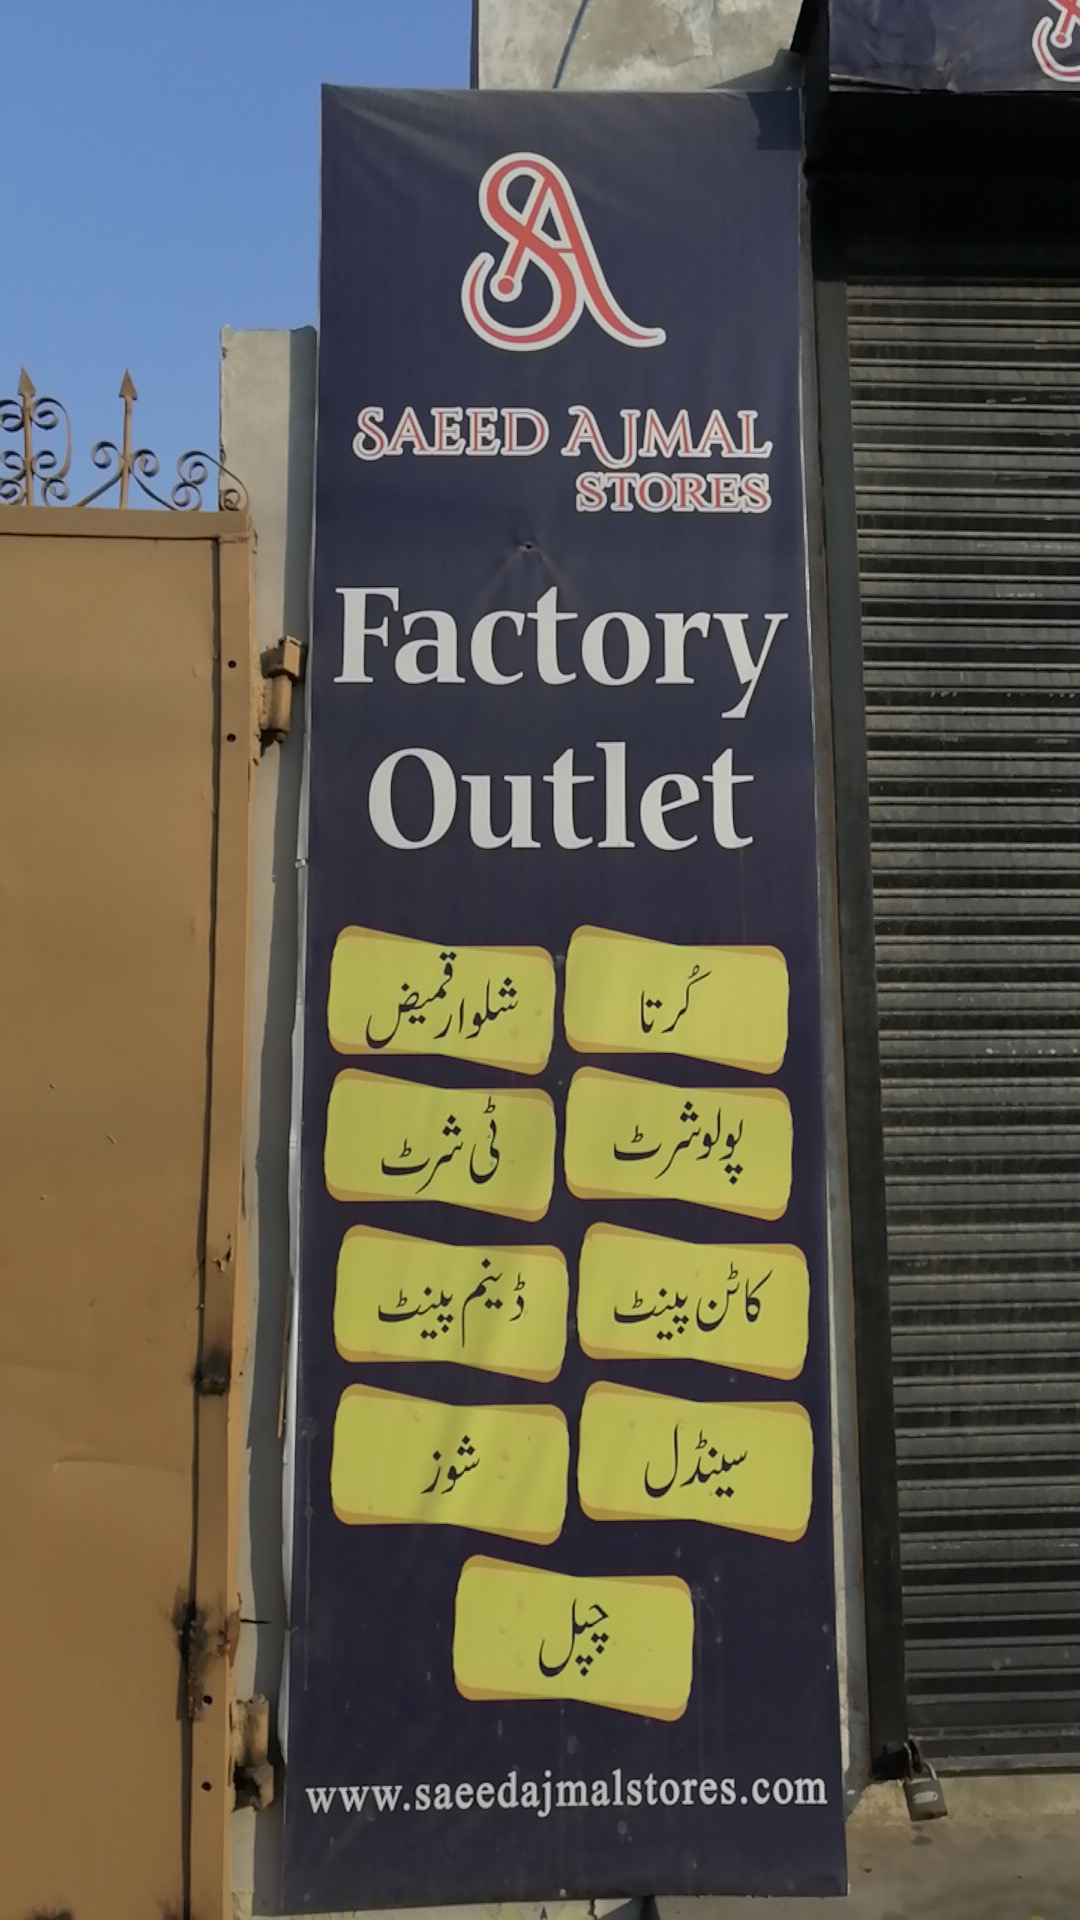 Factory Outlet Saeed Ajmal Stores